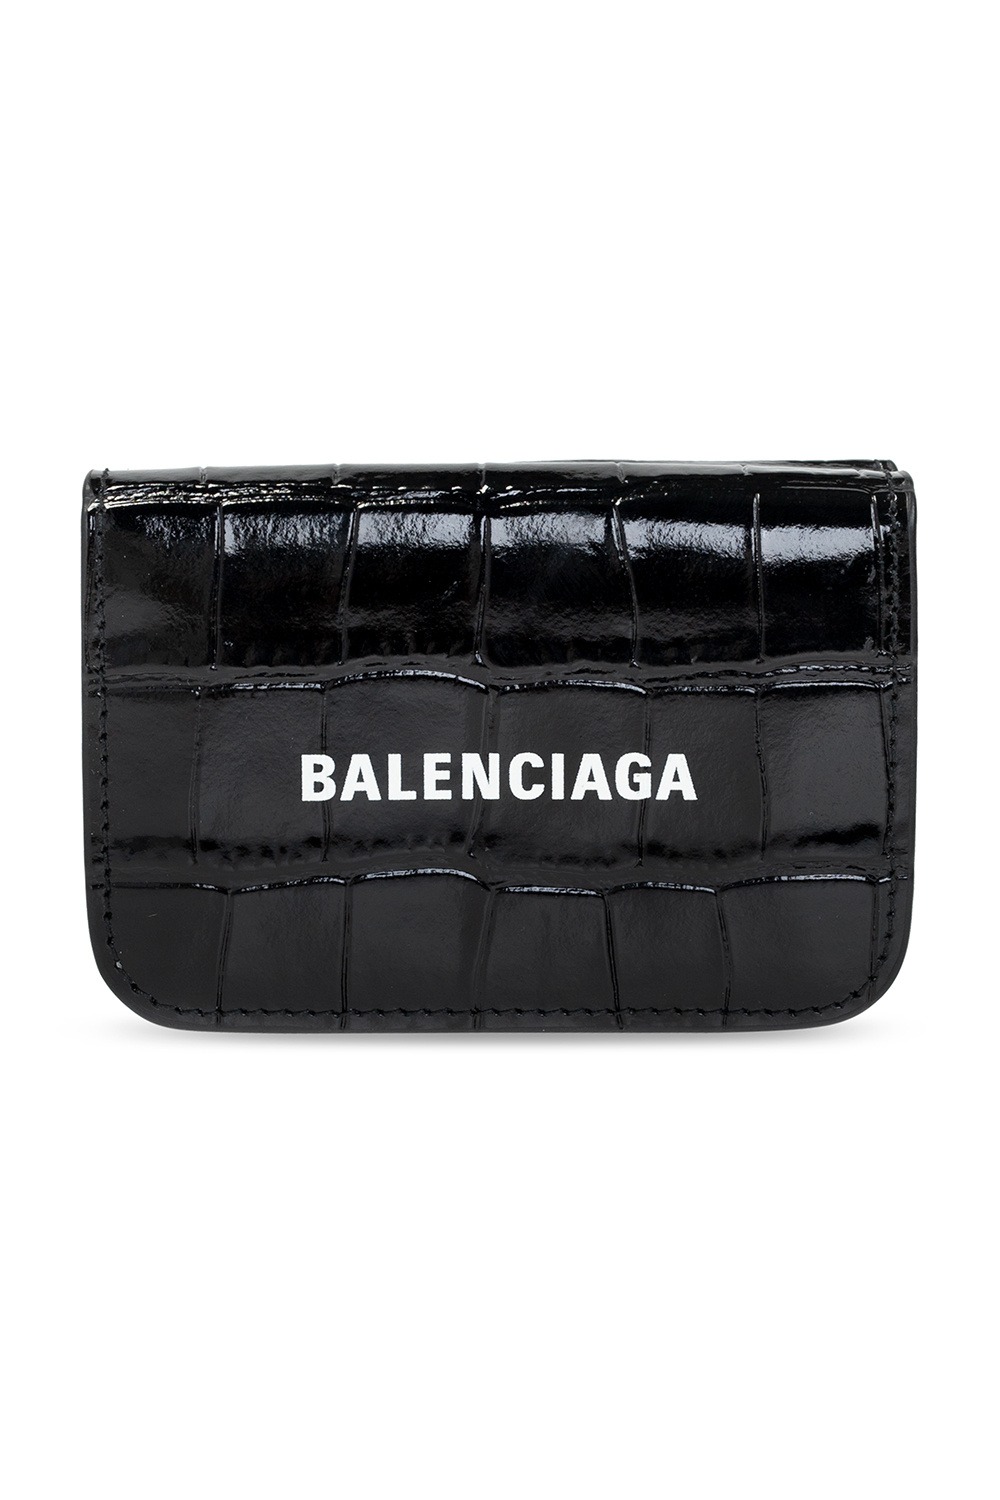 Balenciaga Frequently asked questions